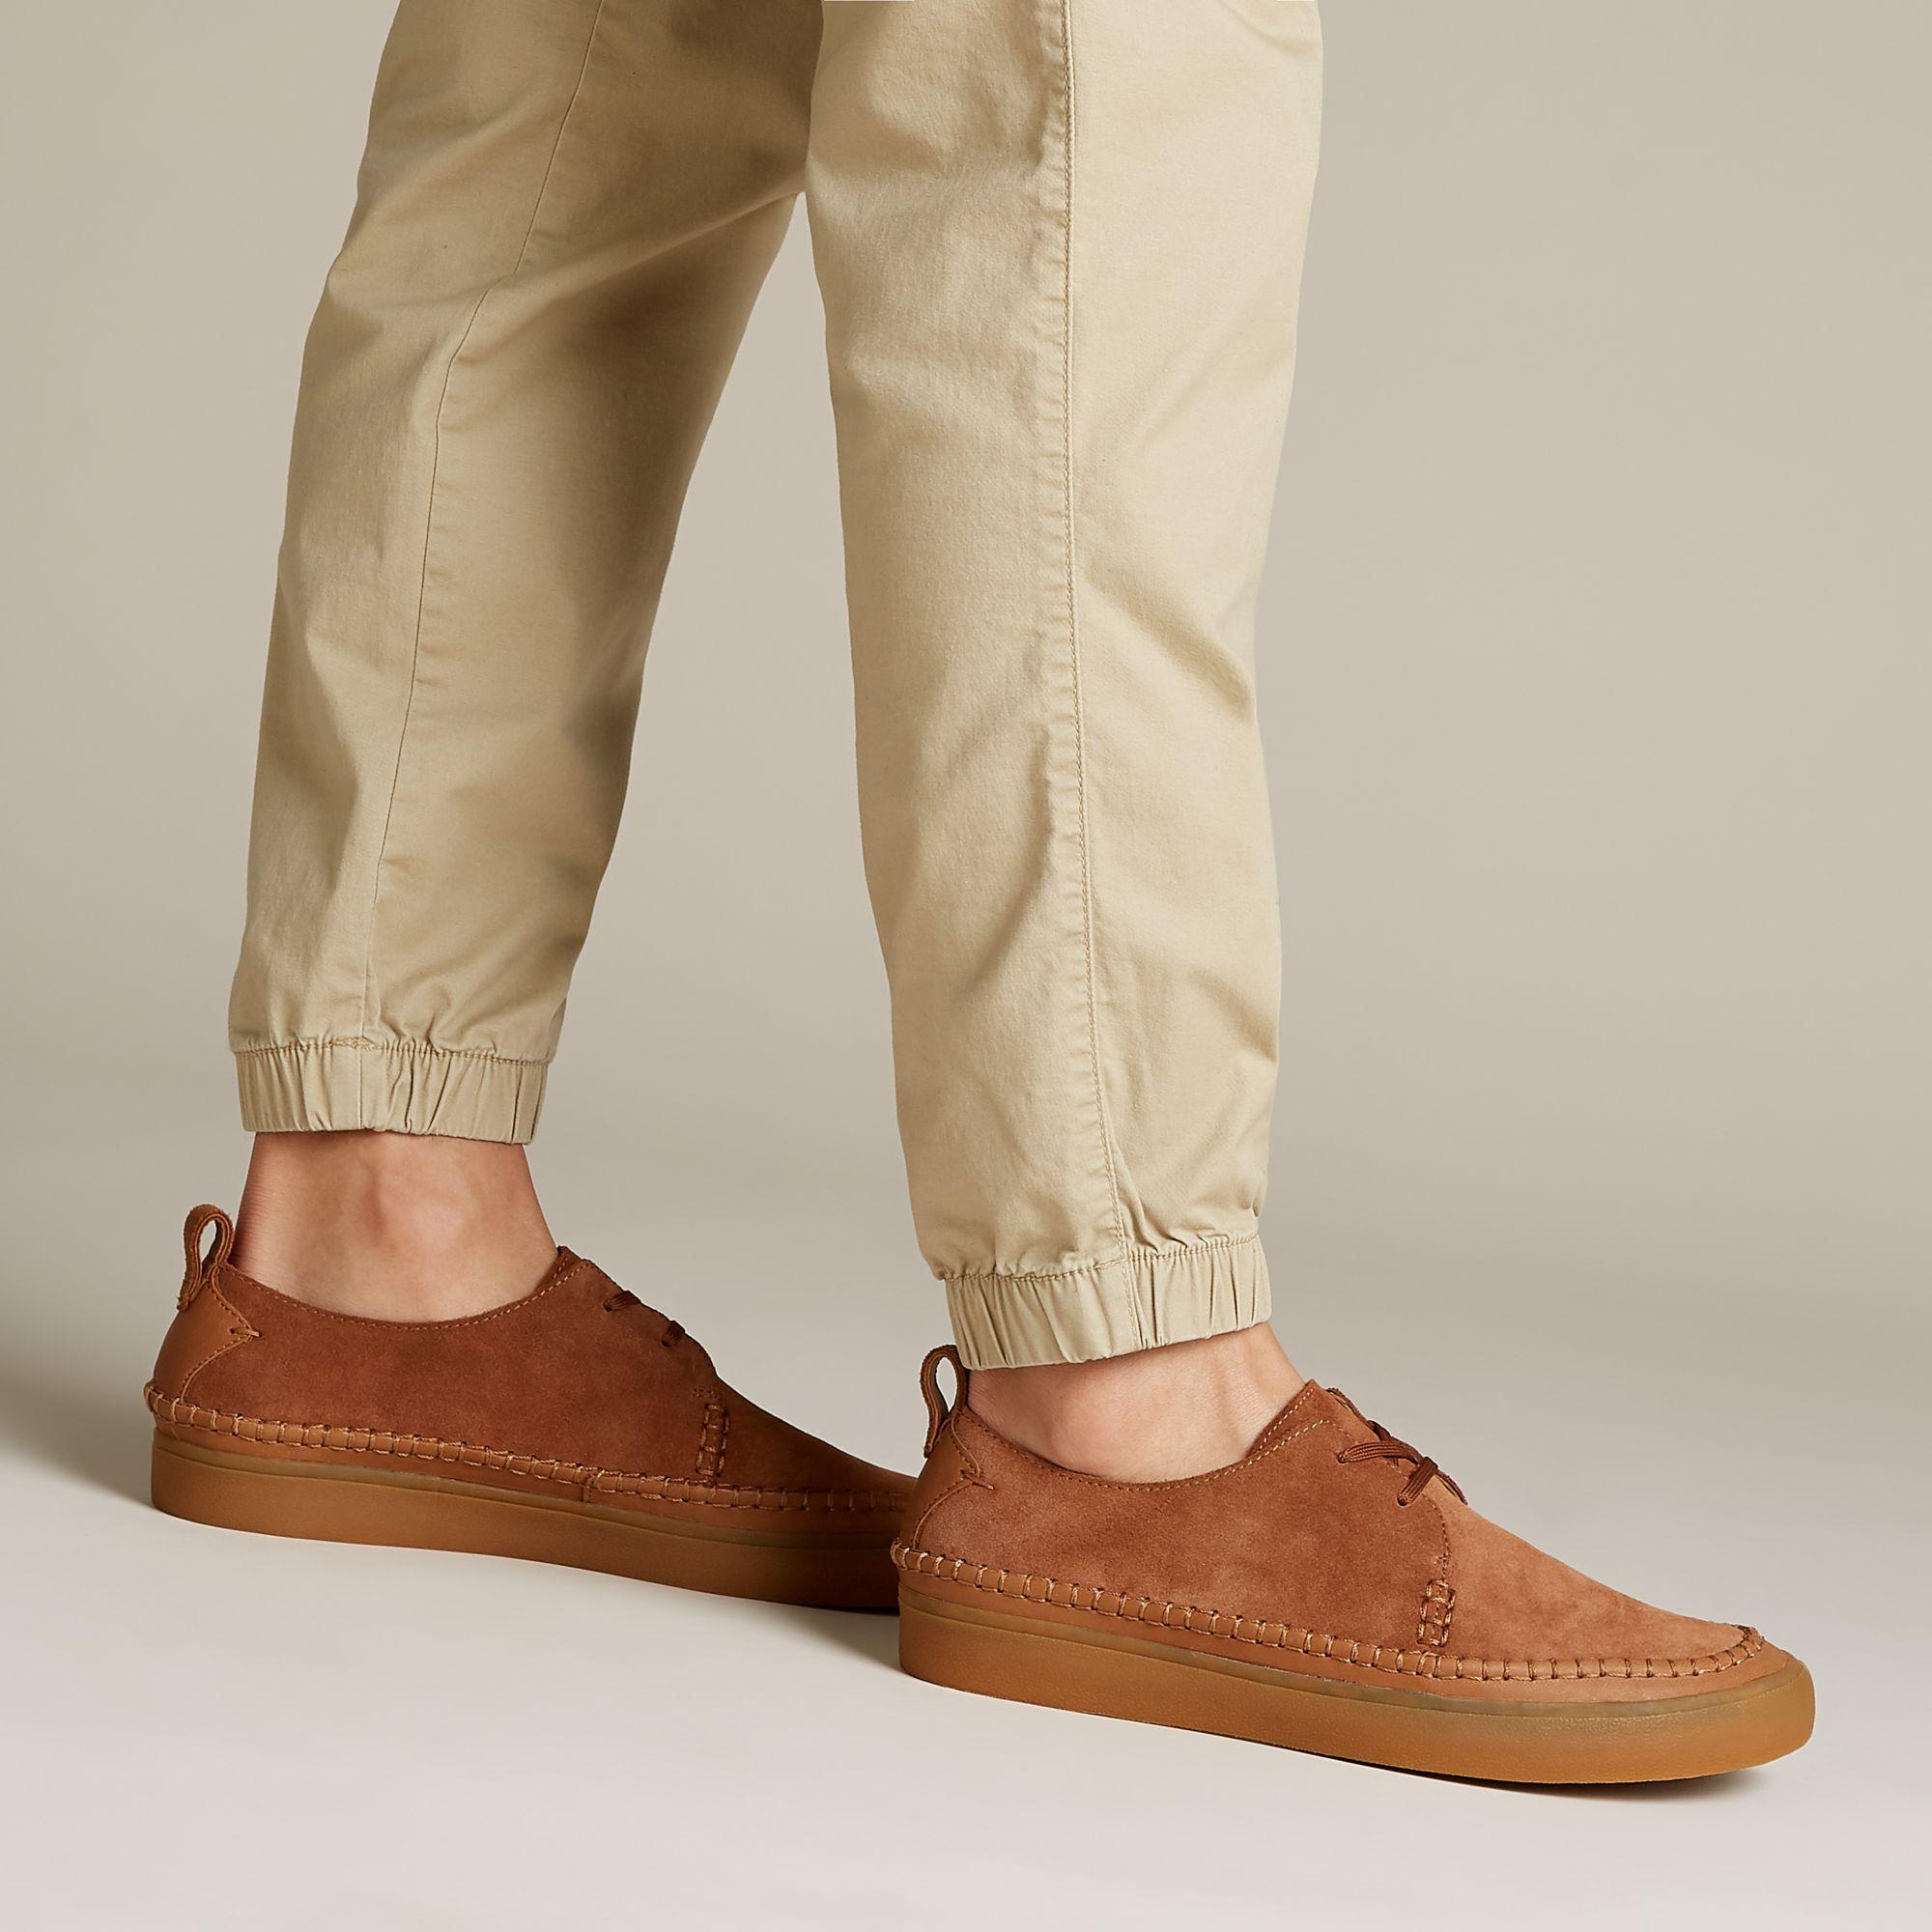 Clarks Lace Kessell Craft in Tan Suede 